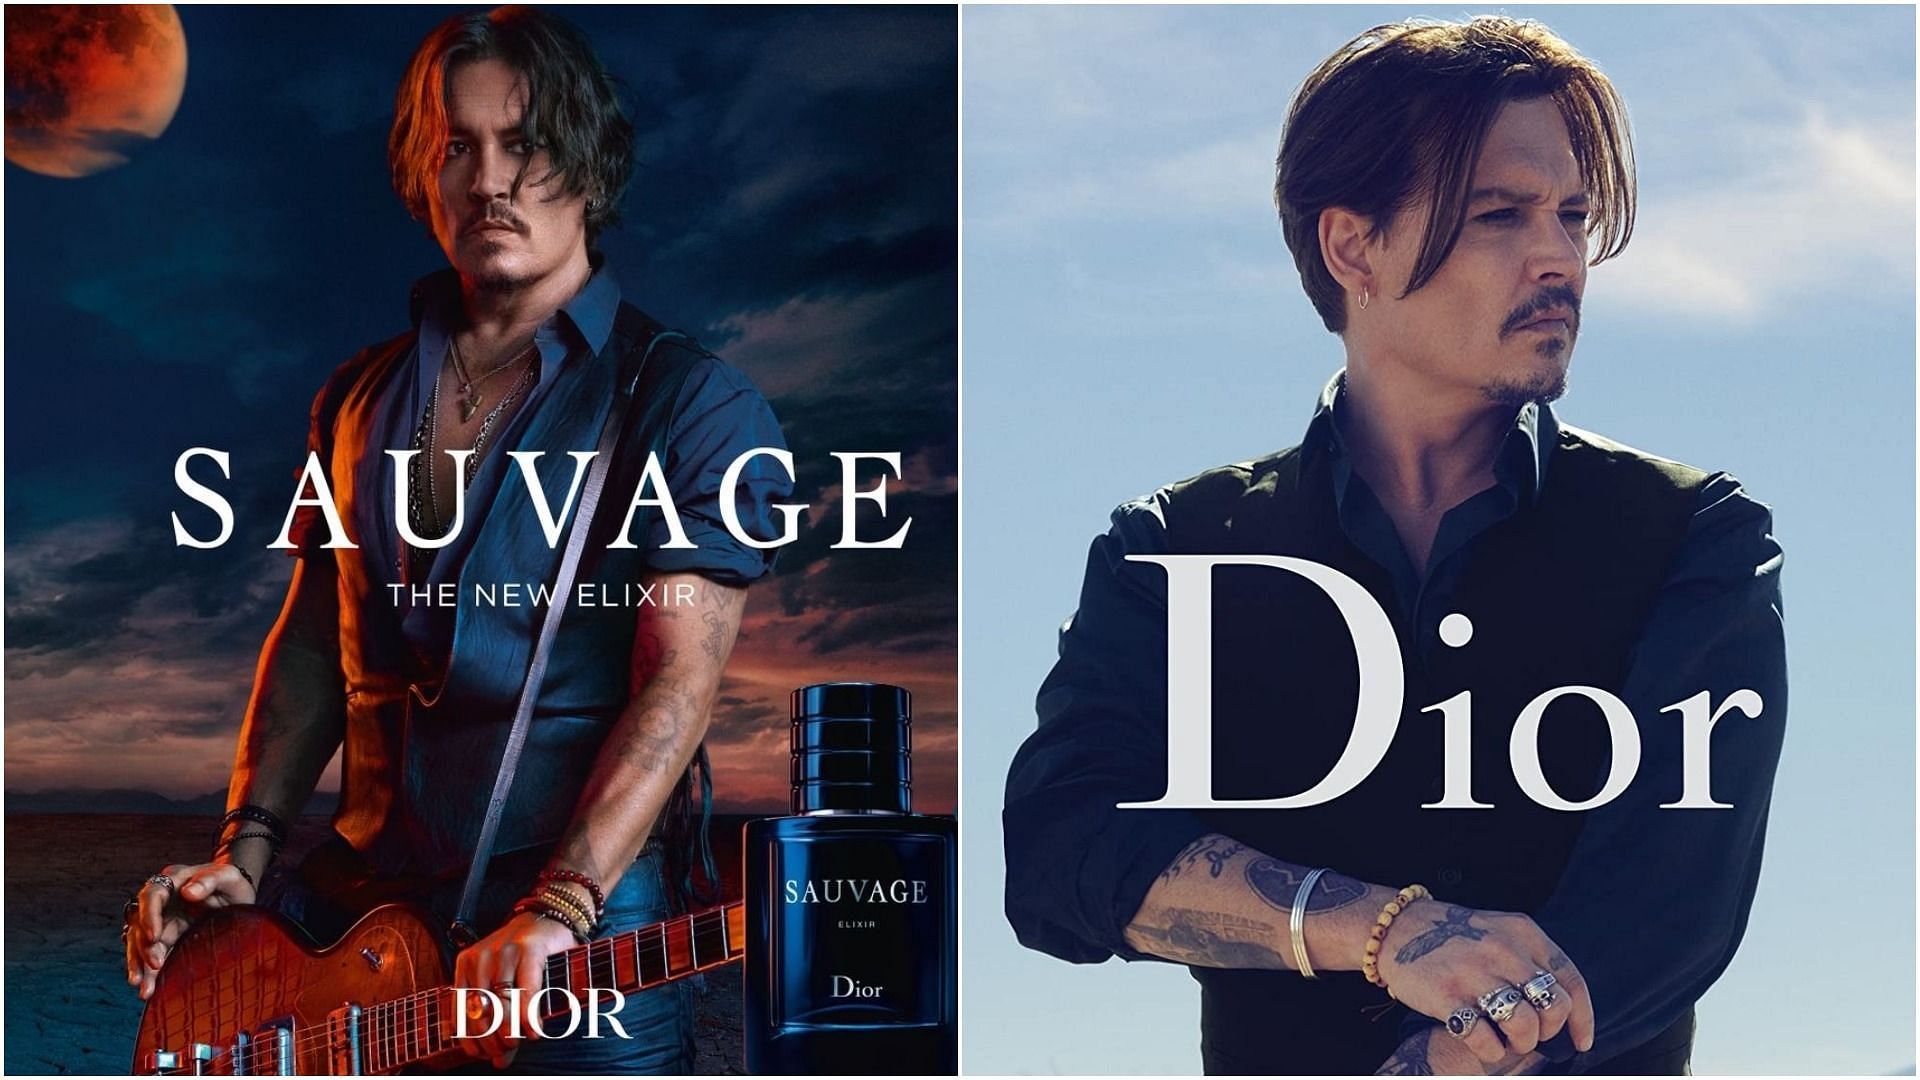 Dior Sauvage  Johnny Depp  Official Advertising  YouTube